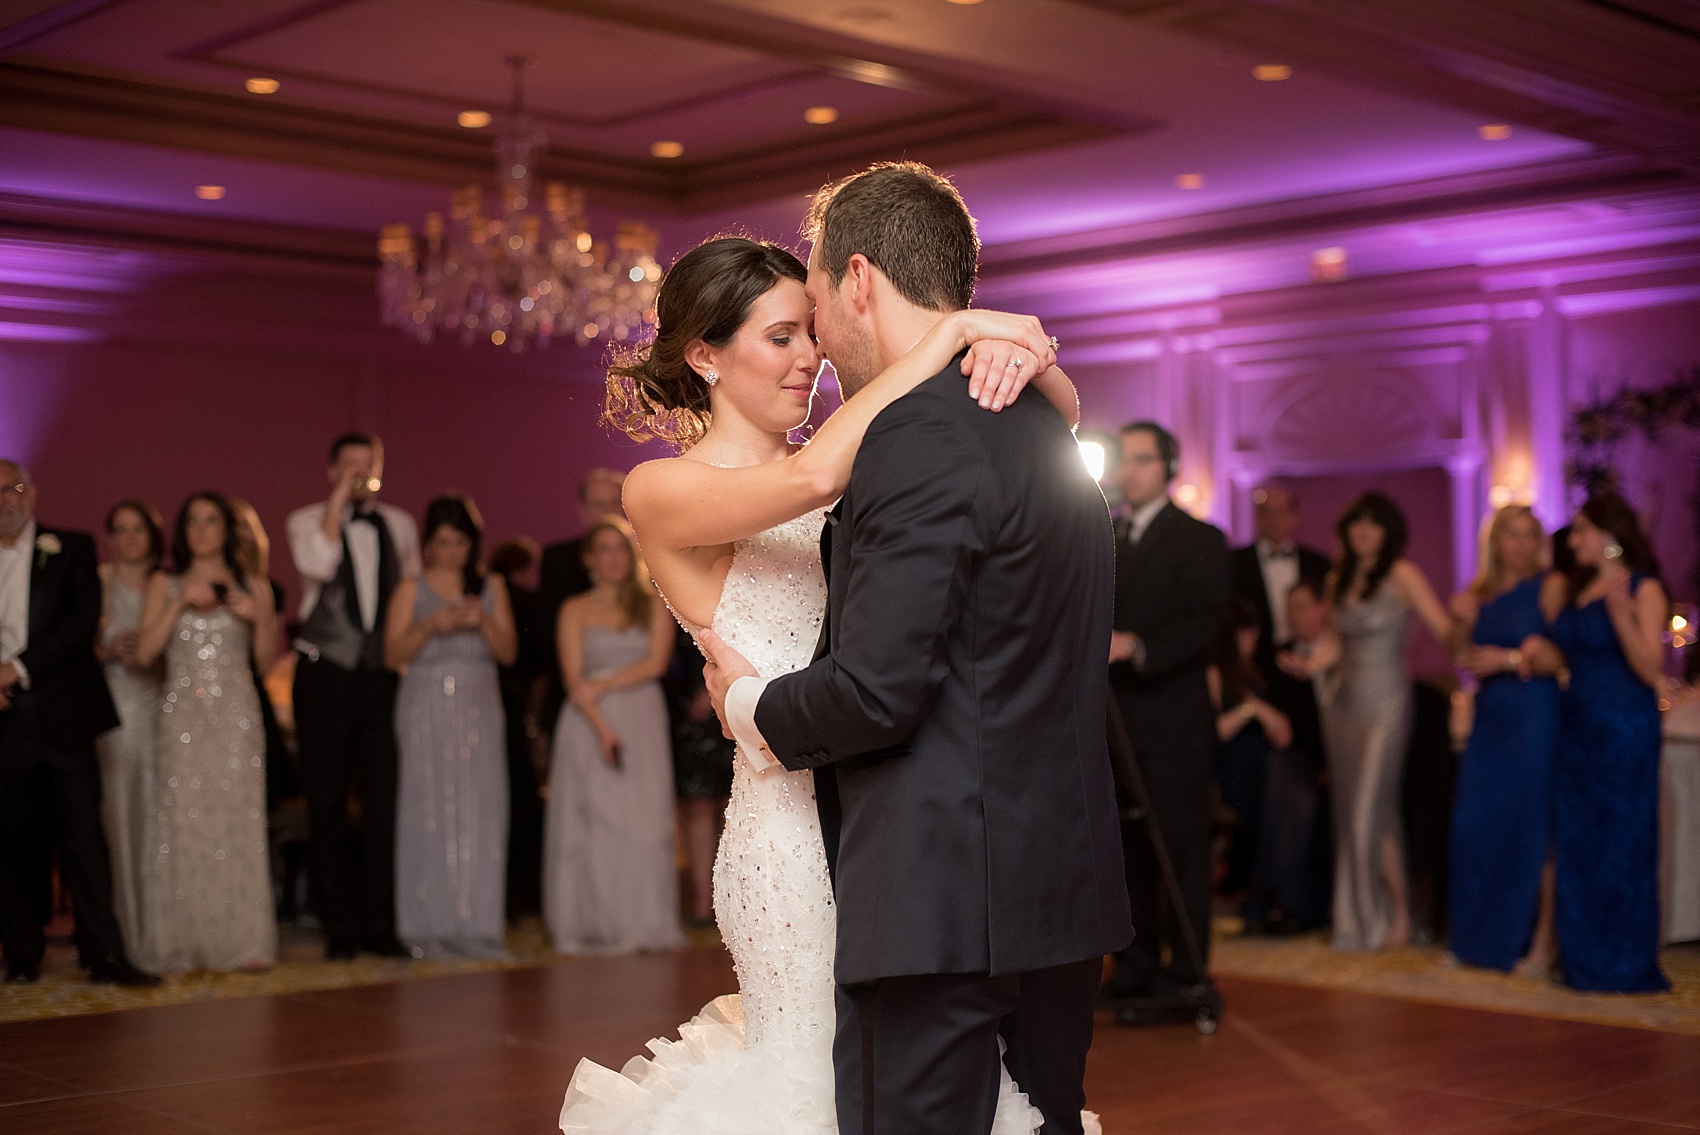 Washington, DC wedding photos by Mikkel Paige. The bride and groom's first dance at The Ritz Carlton, Pentagon City.